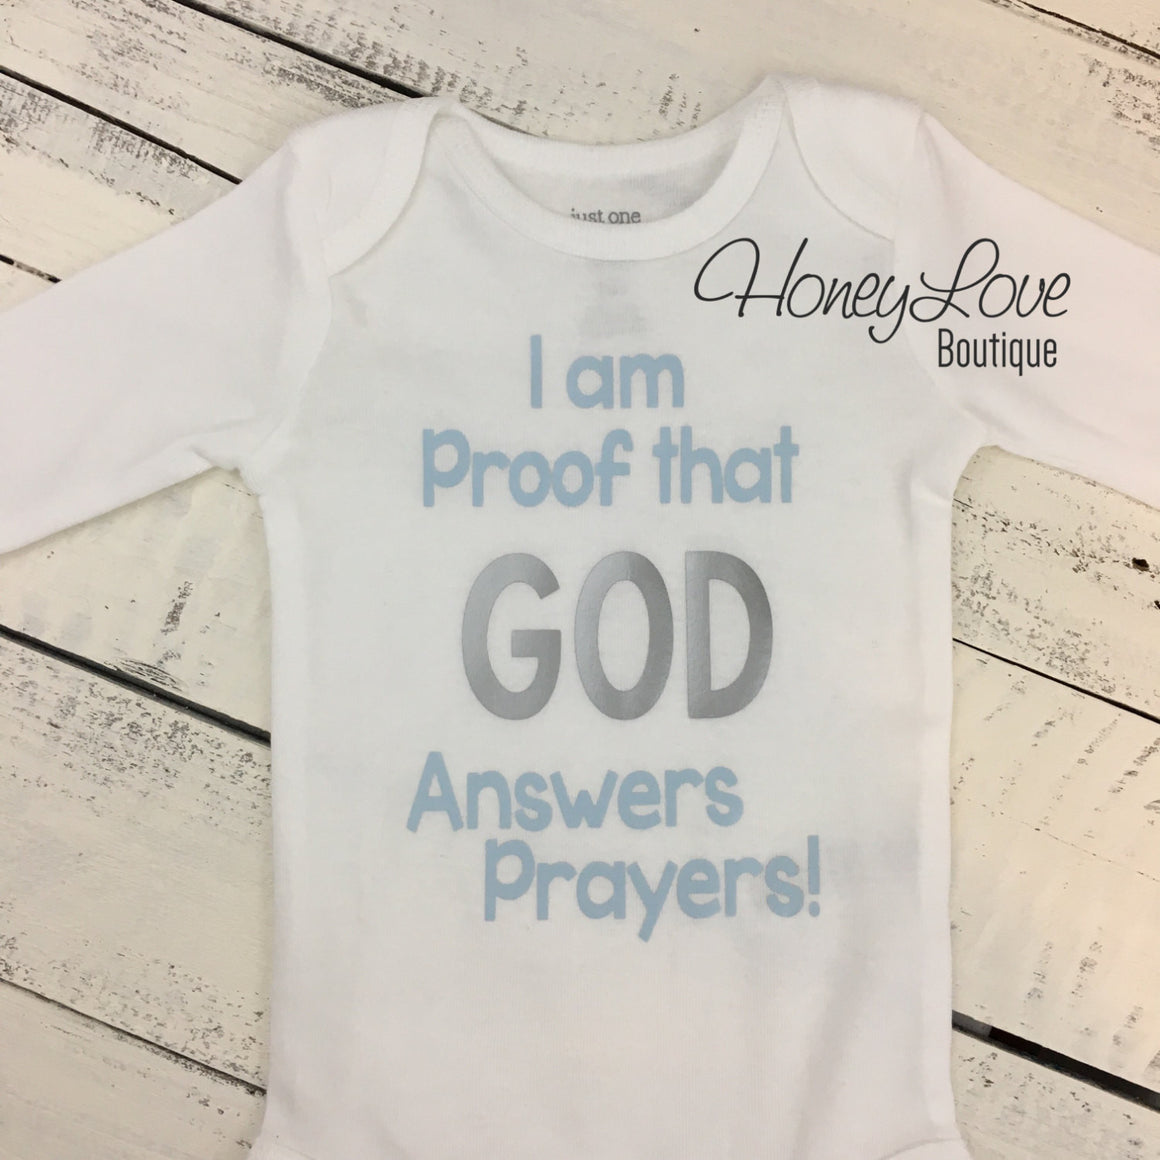 I am Proof that GOD Answers Prayers! Light Blue and Silver - HoneyLoveBoutique